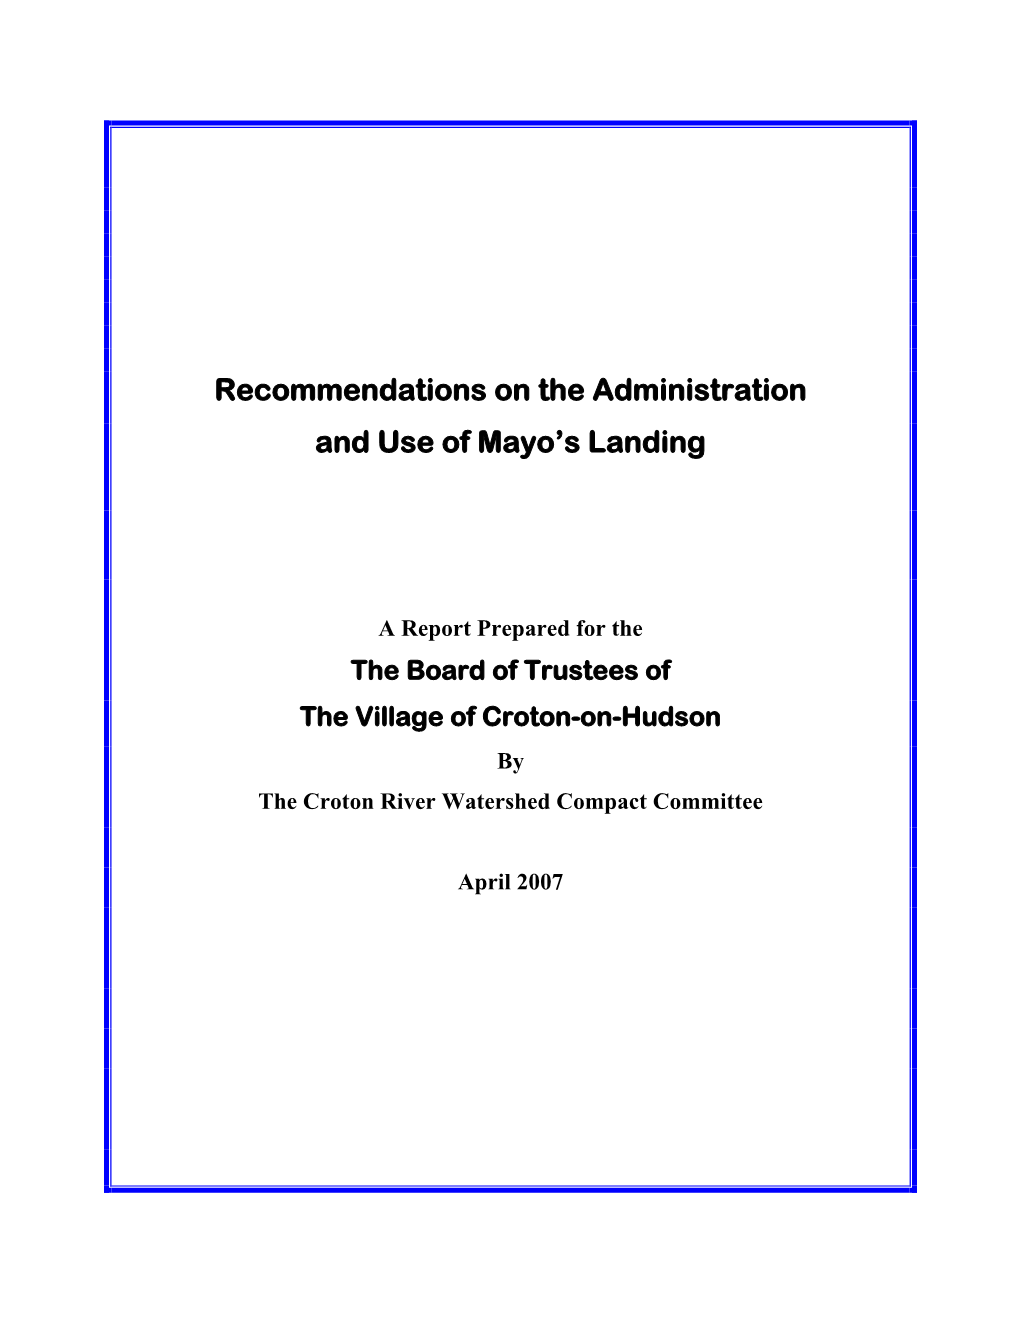 Recommendations on the Administration and Use of Mayo's